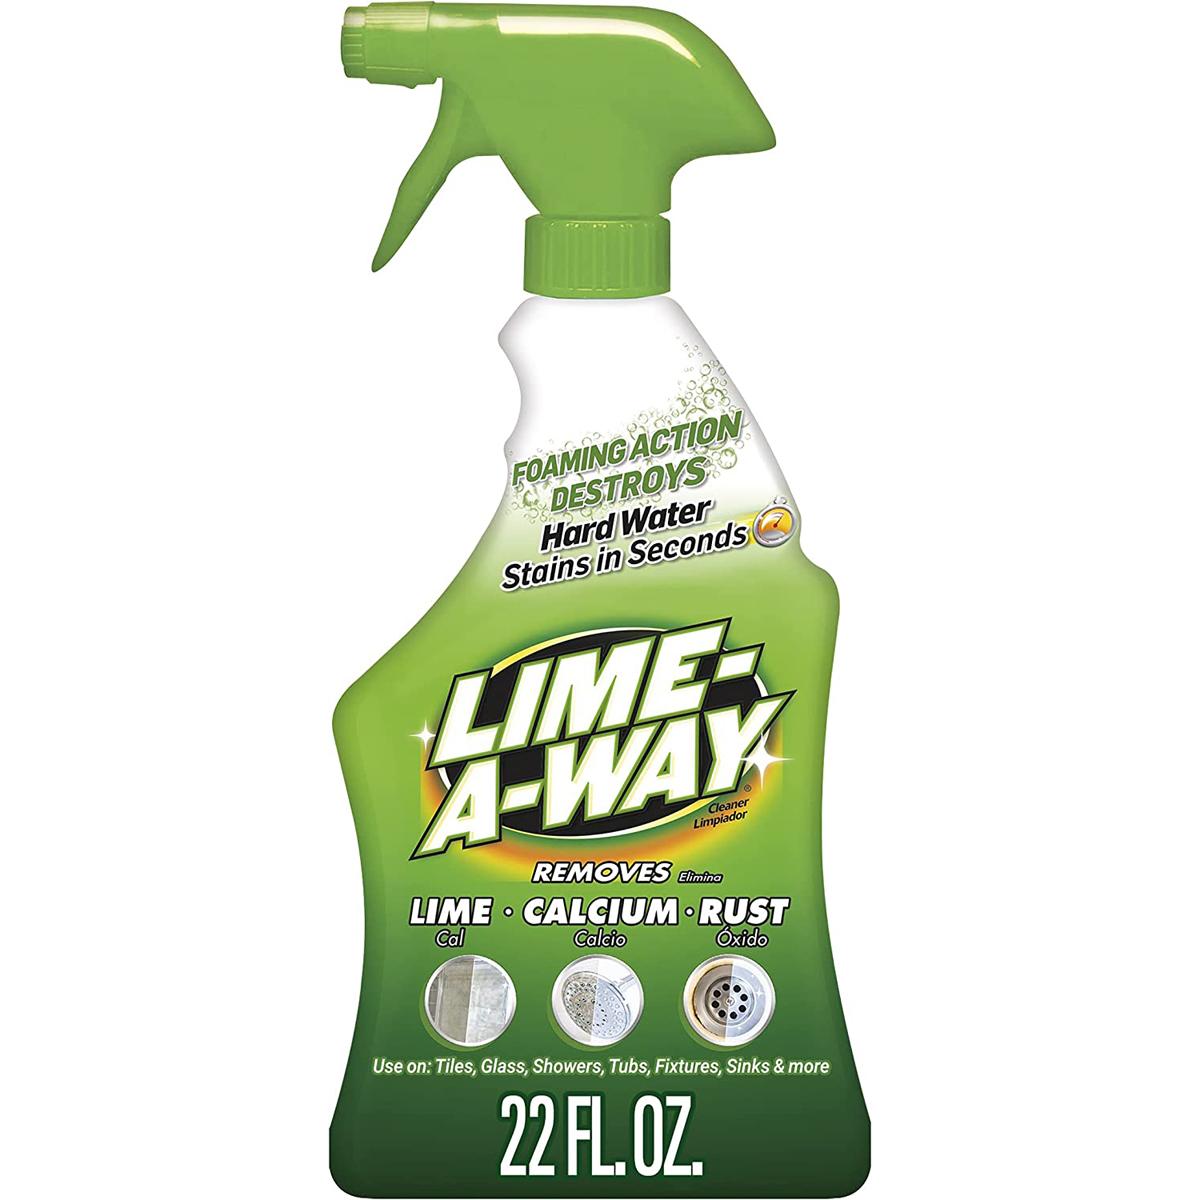 Lime-A-Way Lime Calcium Rust Cleaner for $3.14 Shipped